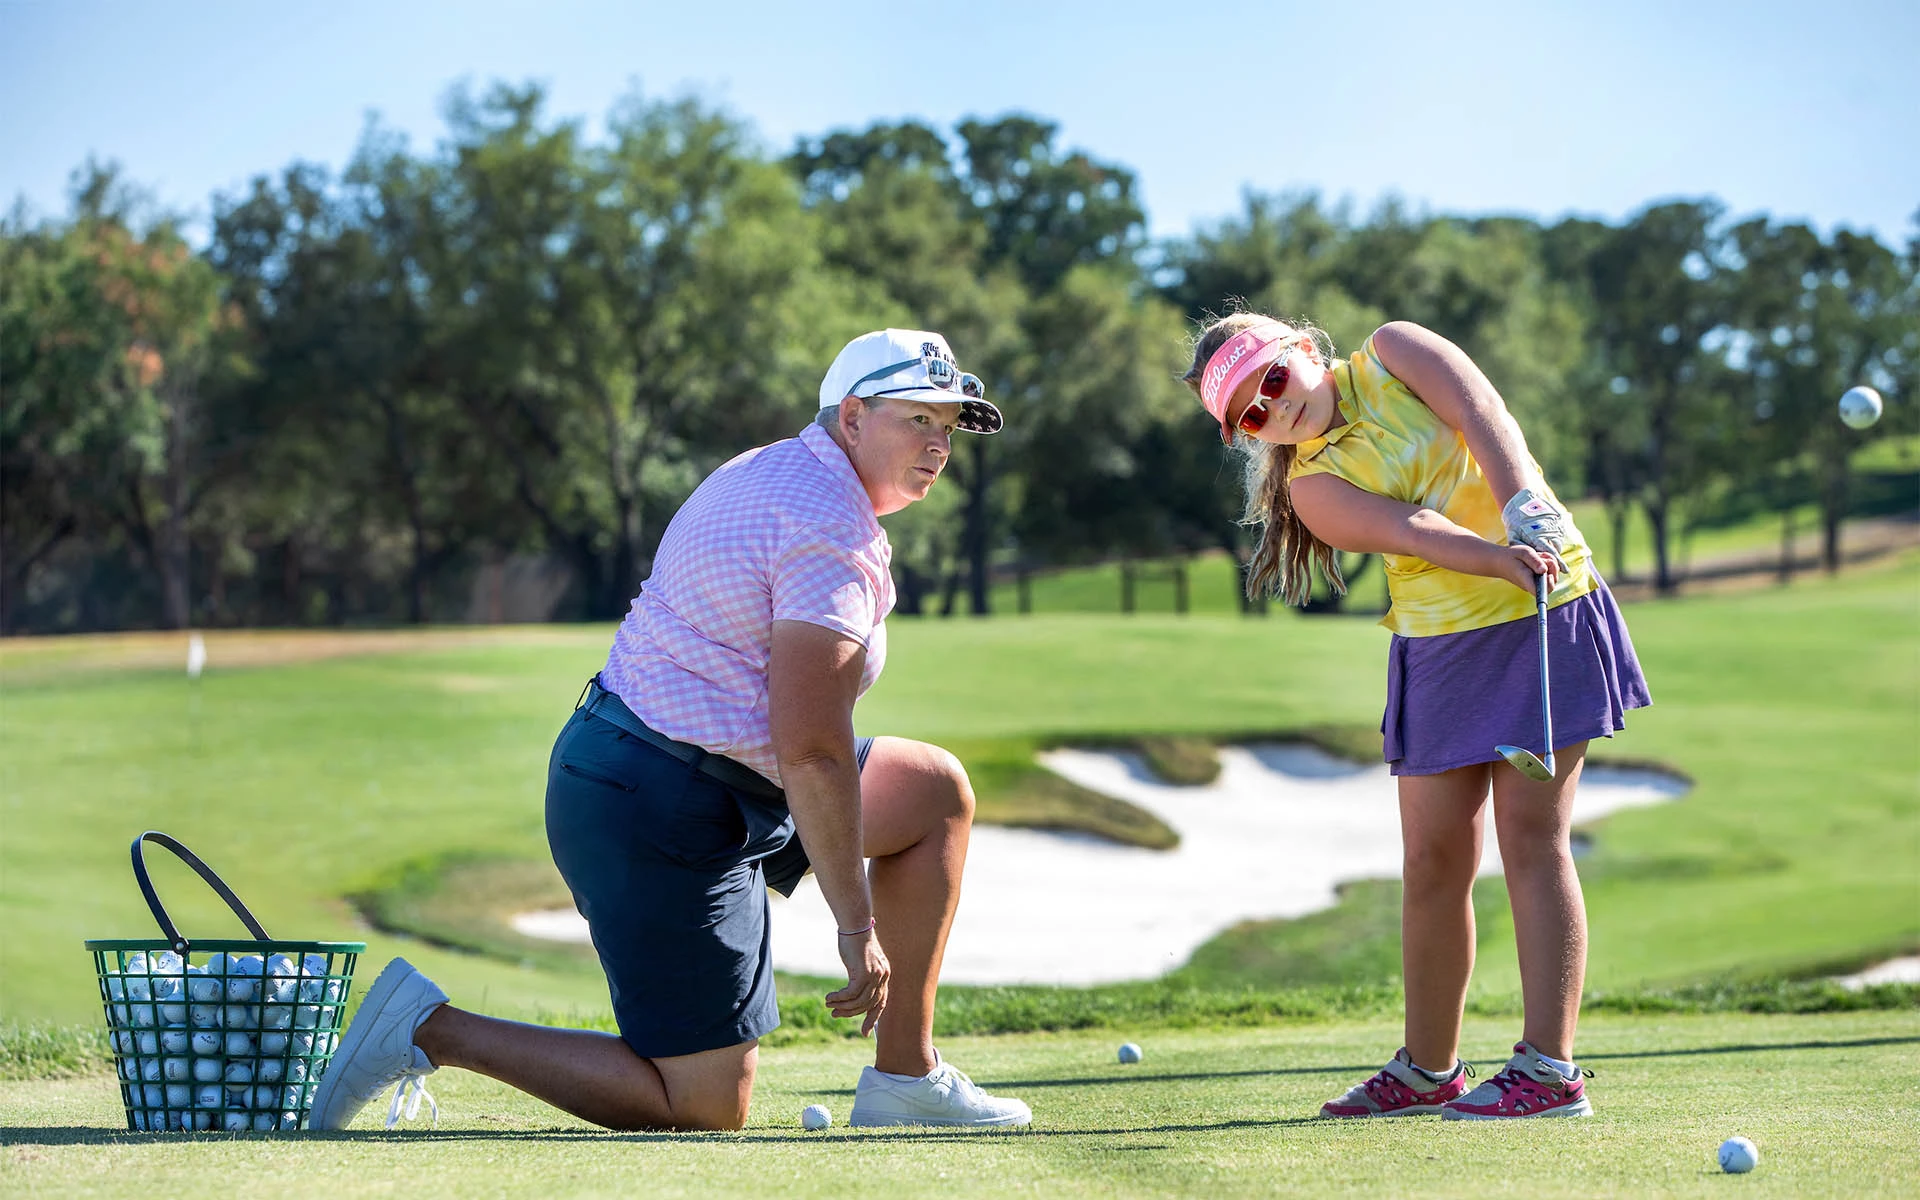 One of Invited's dedicated golf coaches providing personalized instruction to a young girl during a youth golf lesson, teaching her the basics of the game.